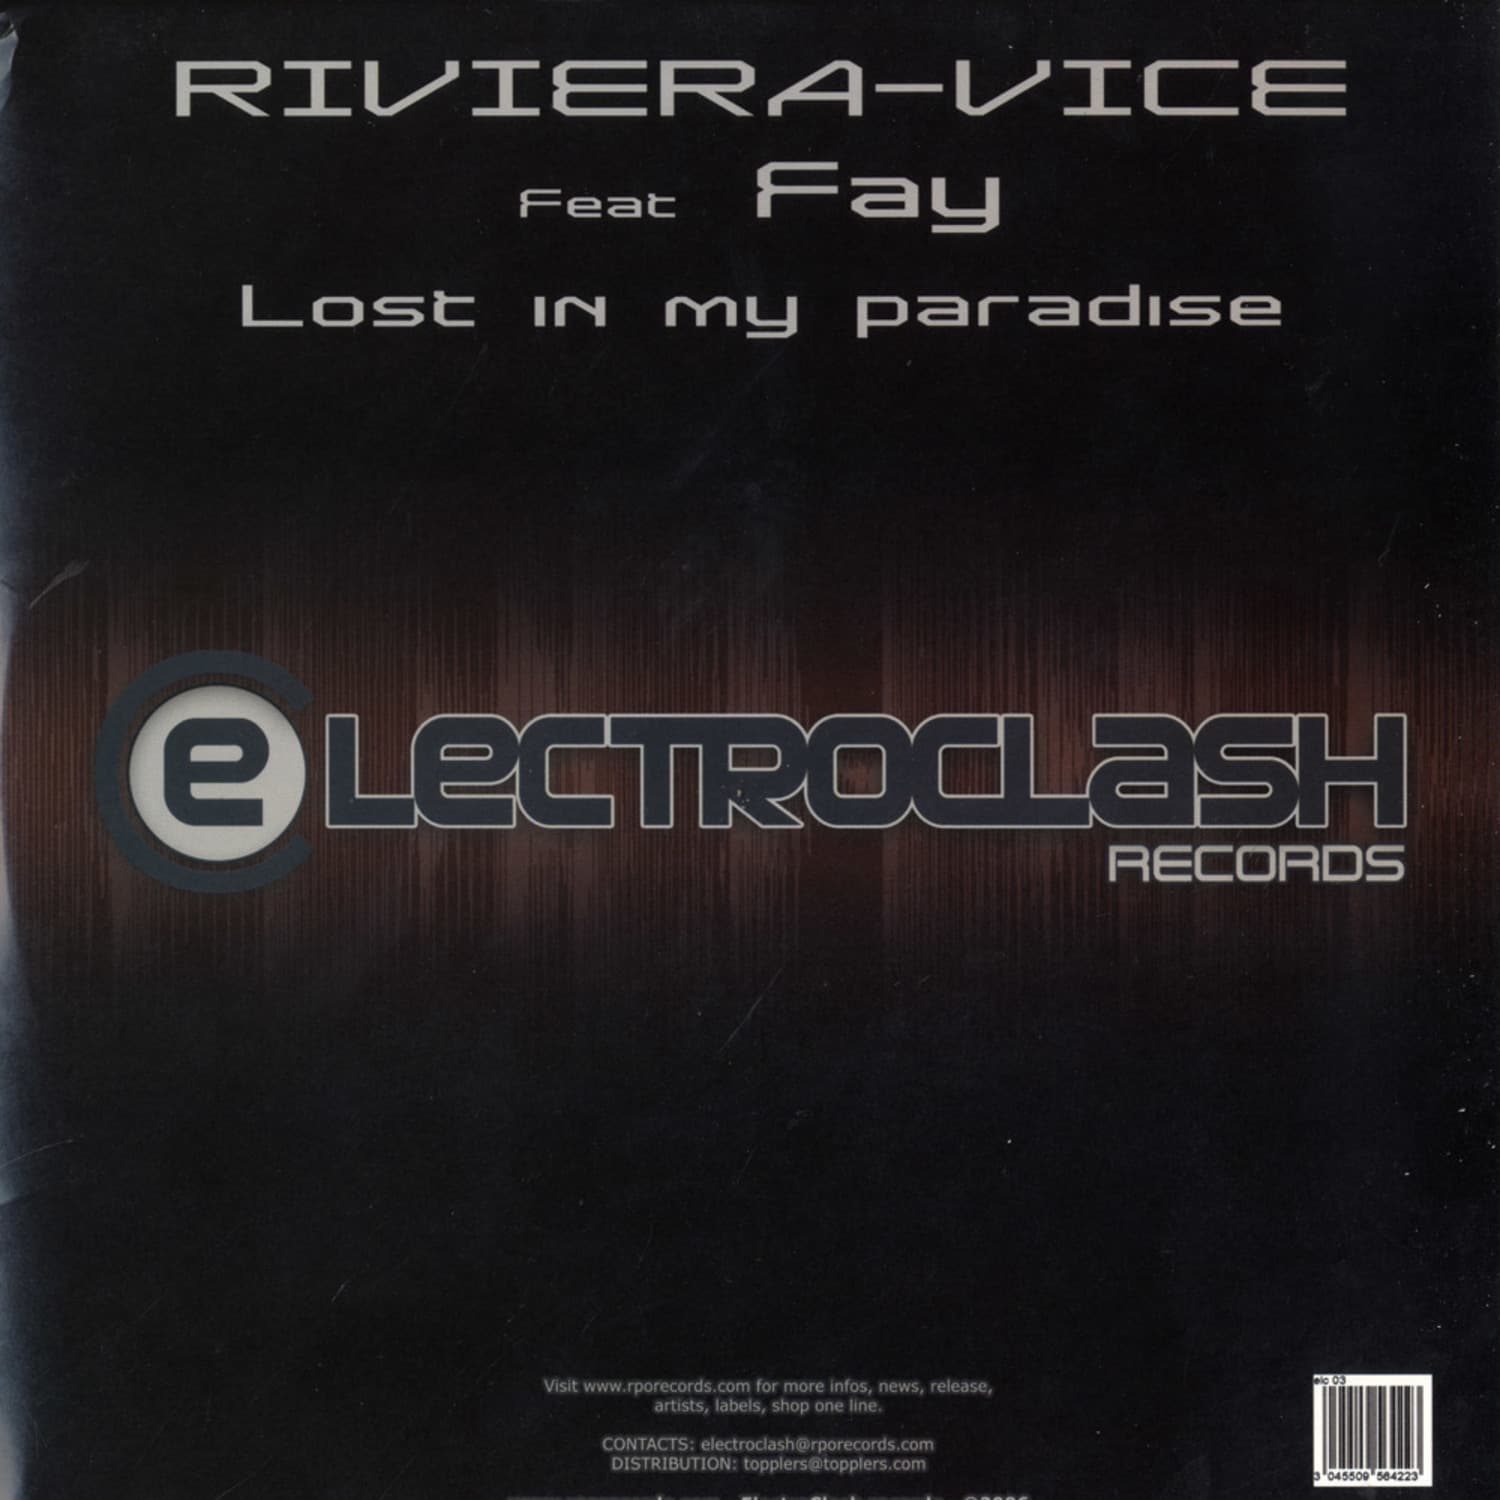 Riviera Vice - LOST IN MY PARADISE